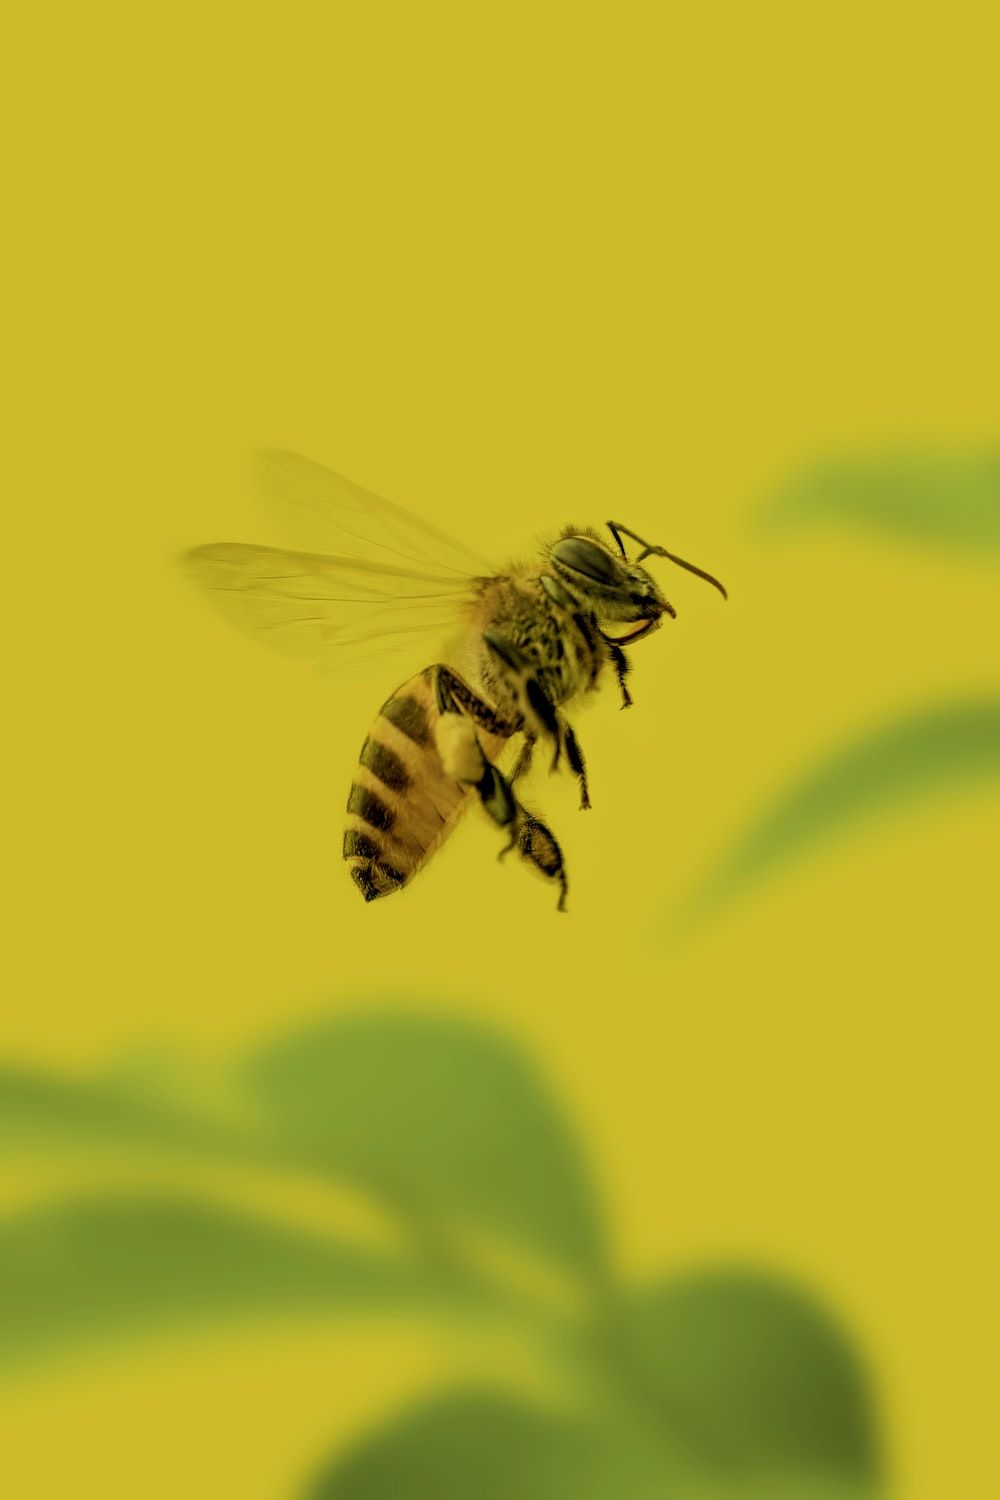 A bee flying over a yellow background - Bee